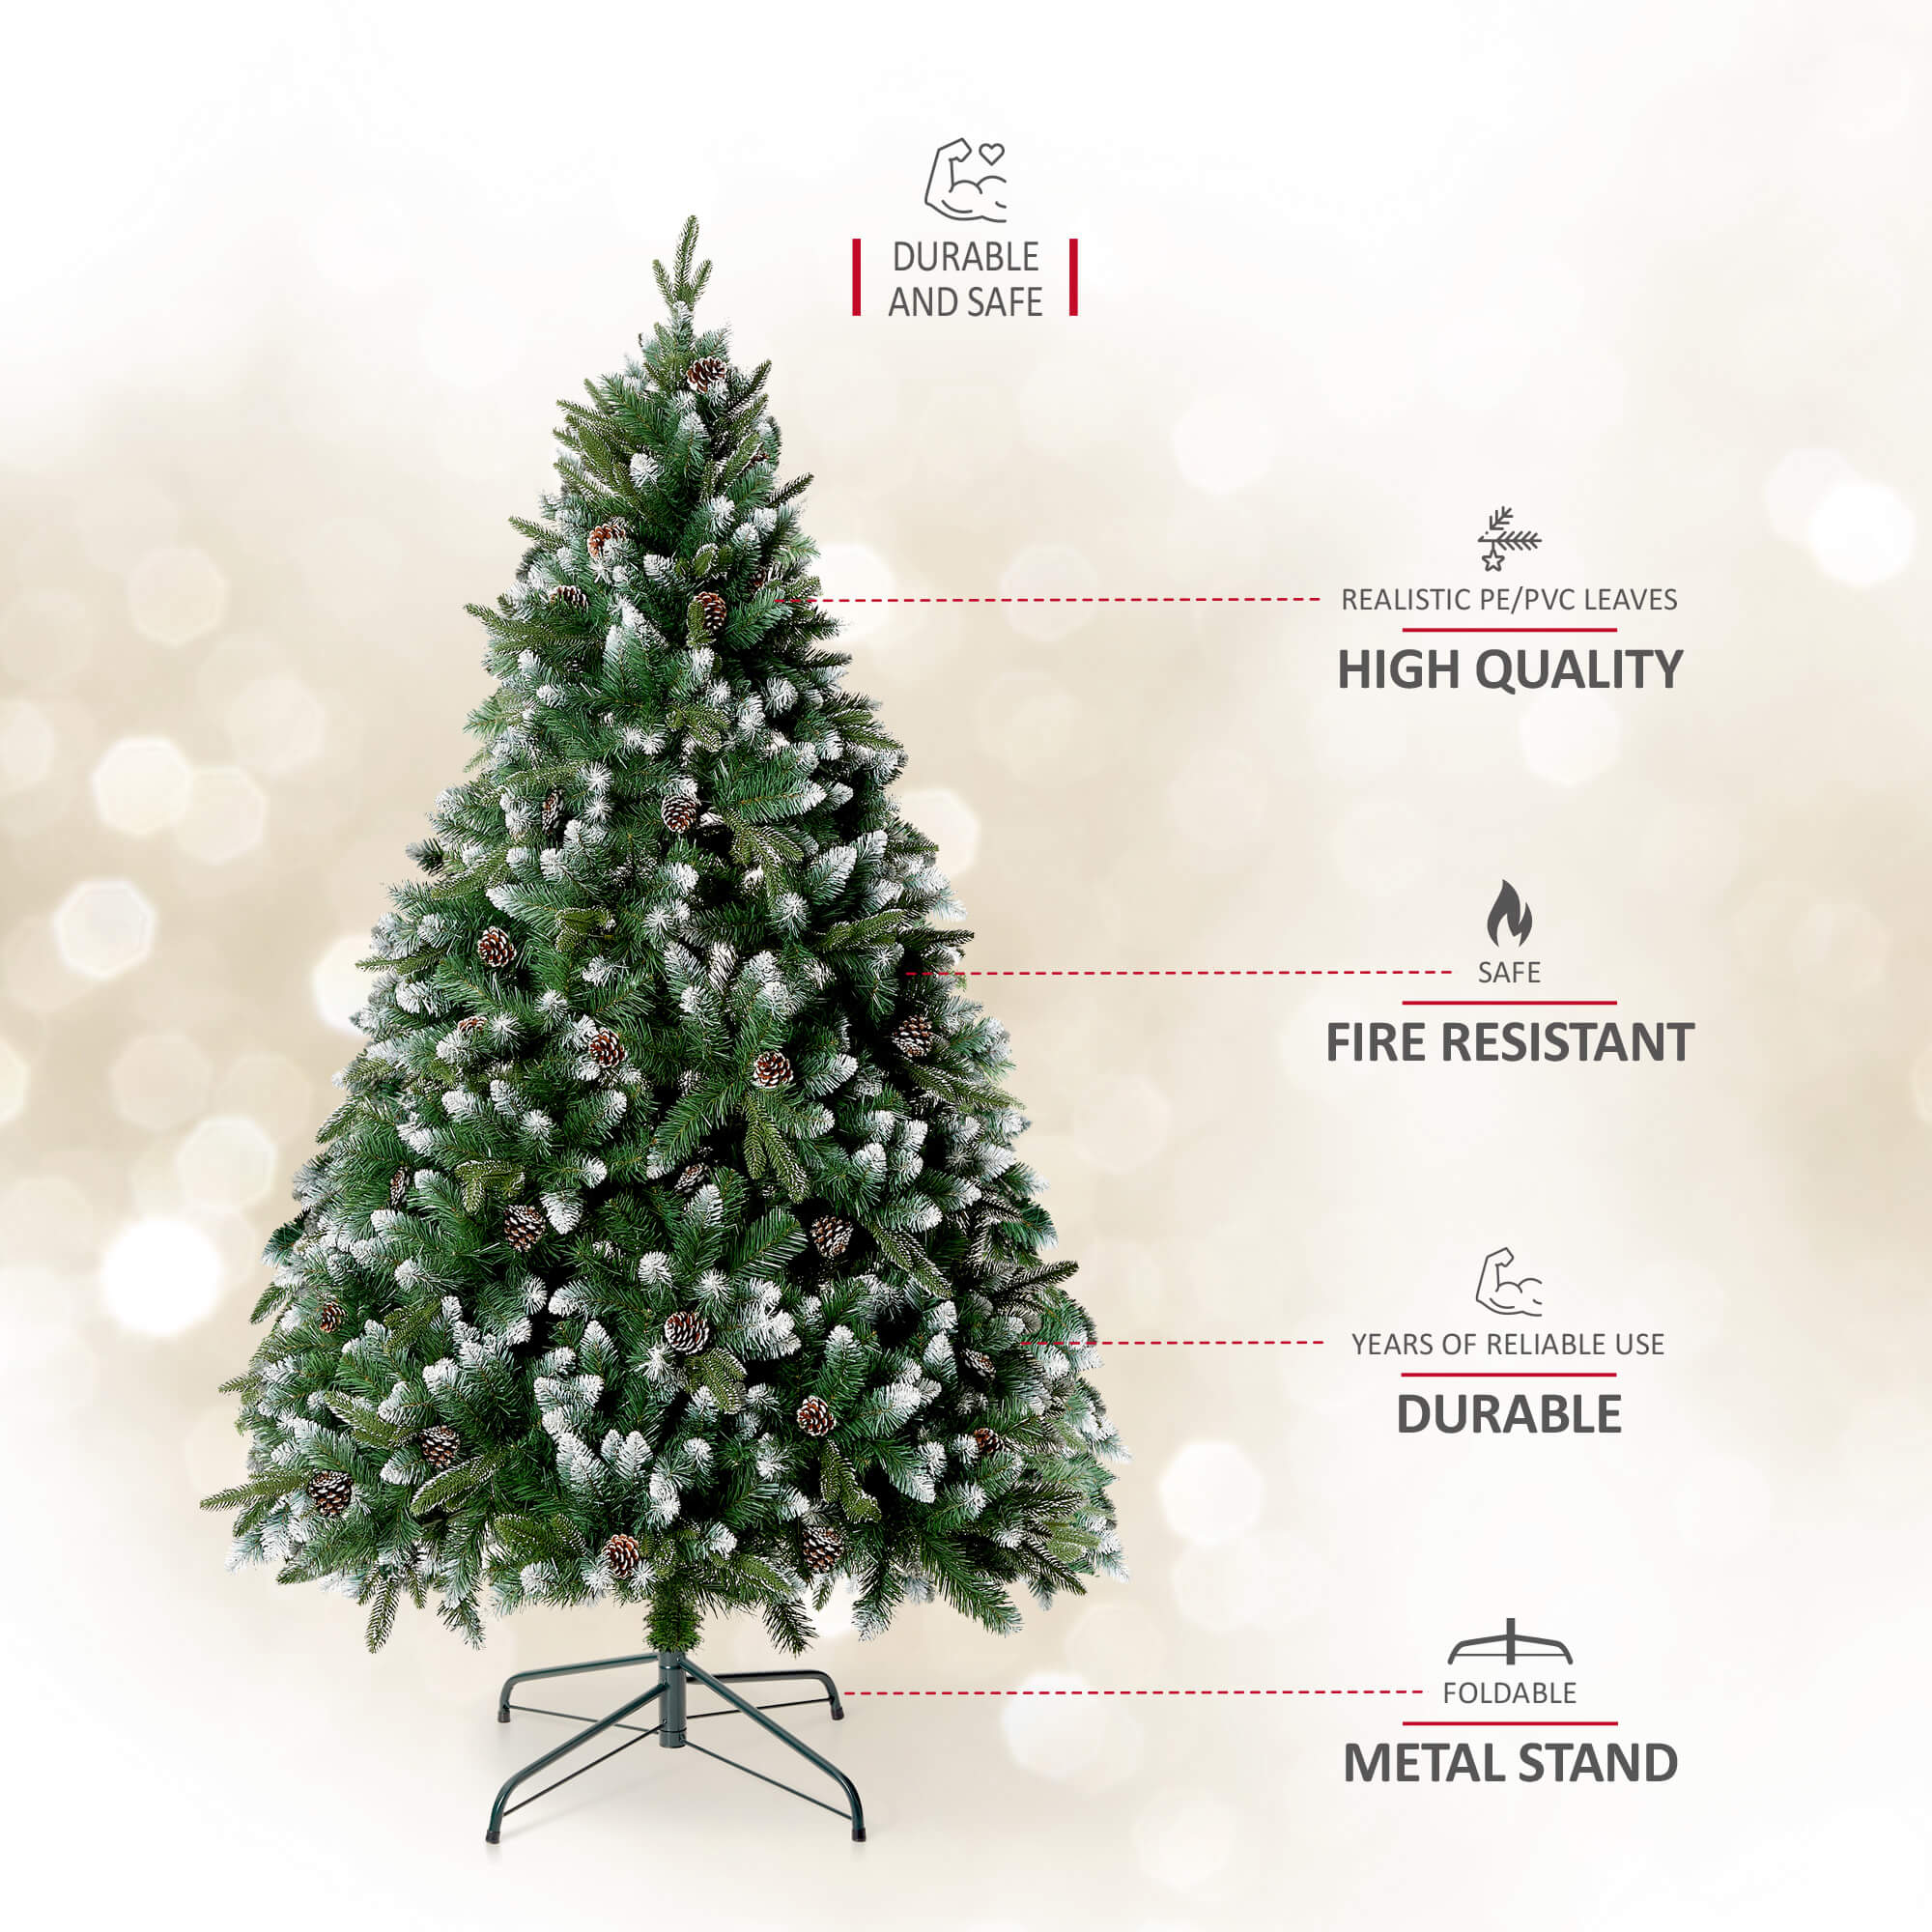 VeryMerry 5FT 'Glacier' Snowy Christmas Tree with Real Frosted Pinecones, Foldable Metal Stand, Snow Flocked Artificial Tree PVC and PE Tips